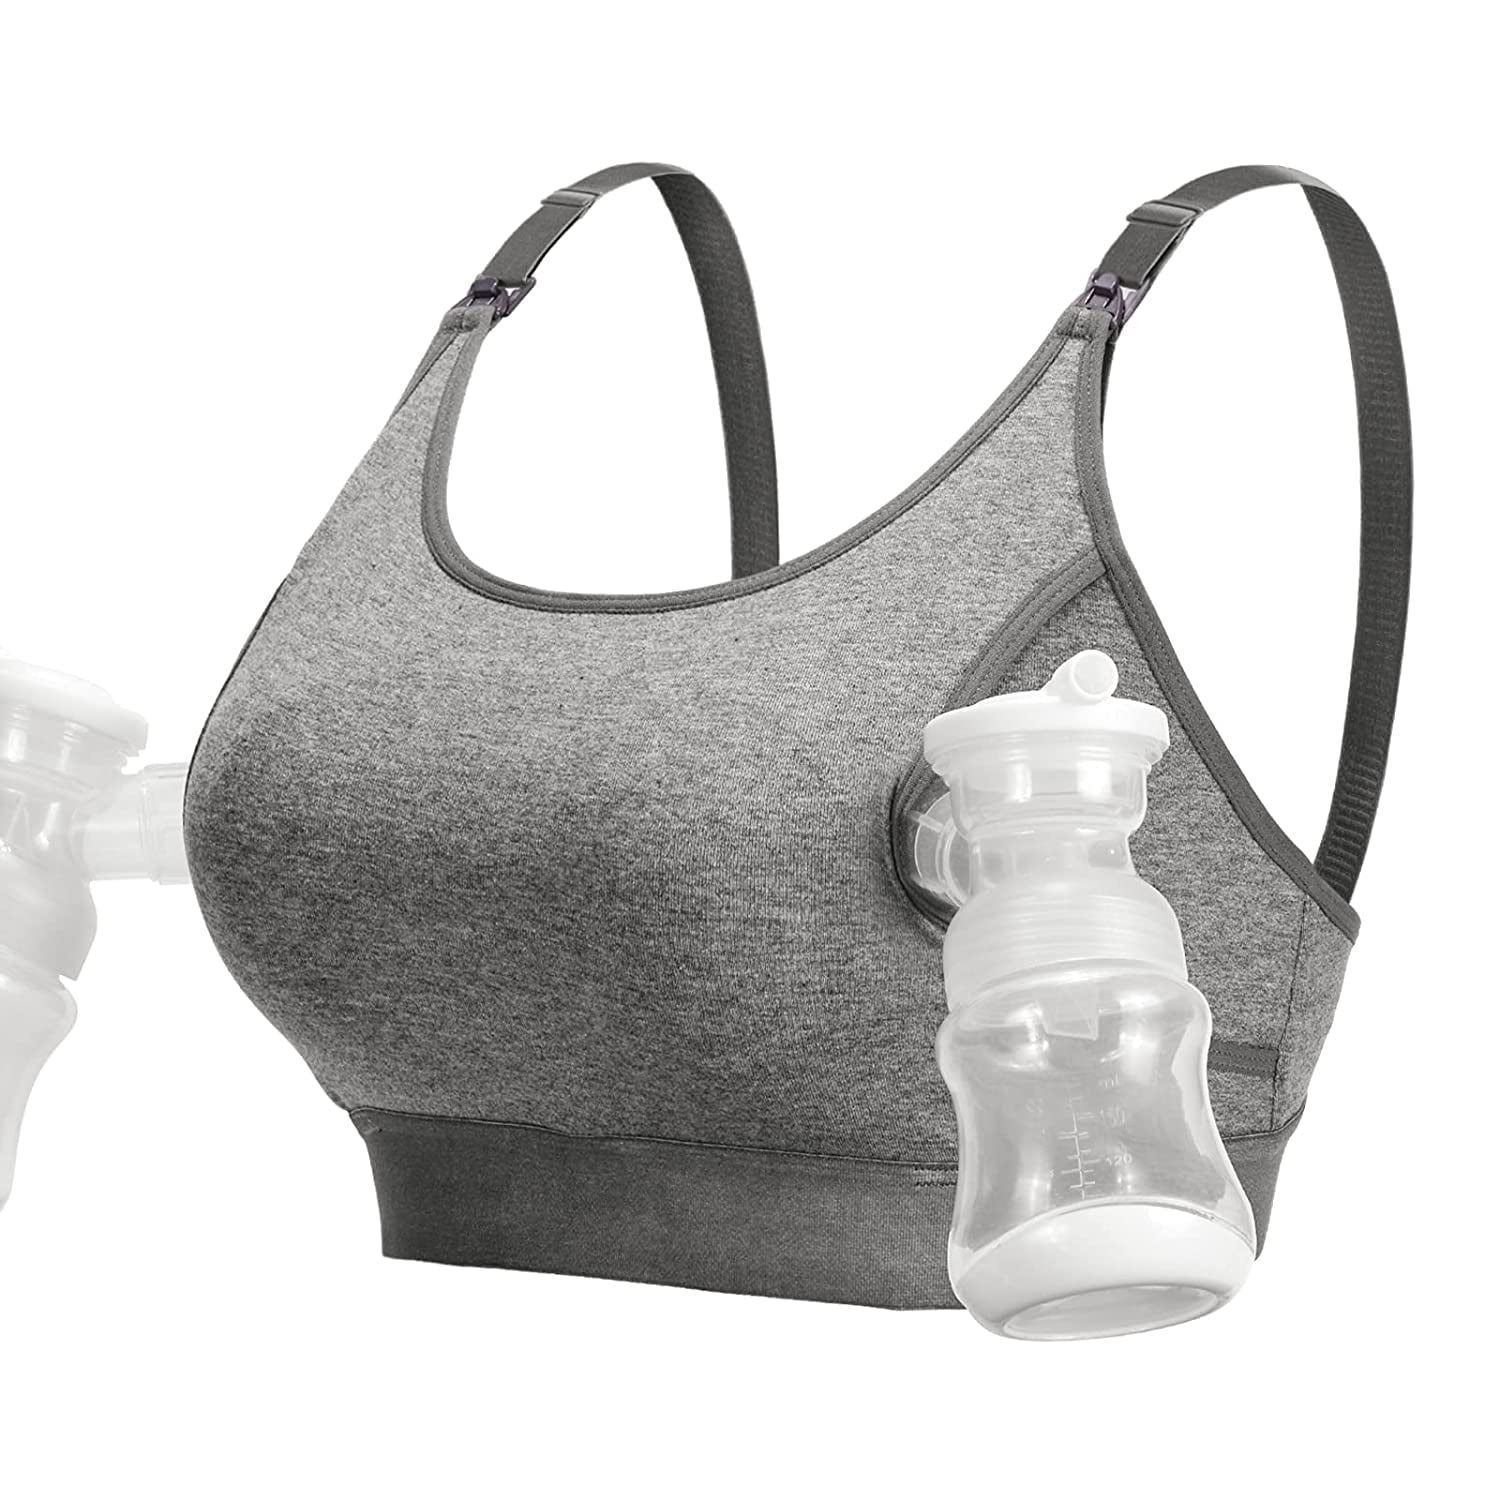 I used @Momcozy Official bras my last time breastfeeding/pumping and t